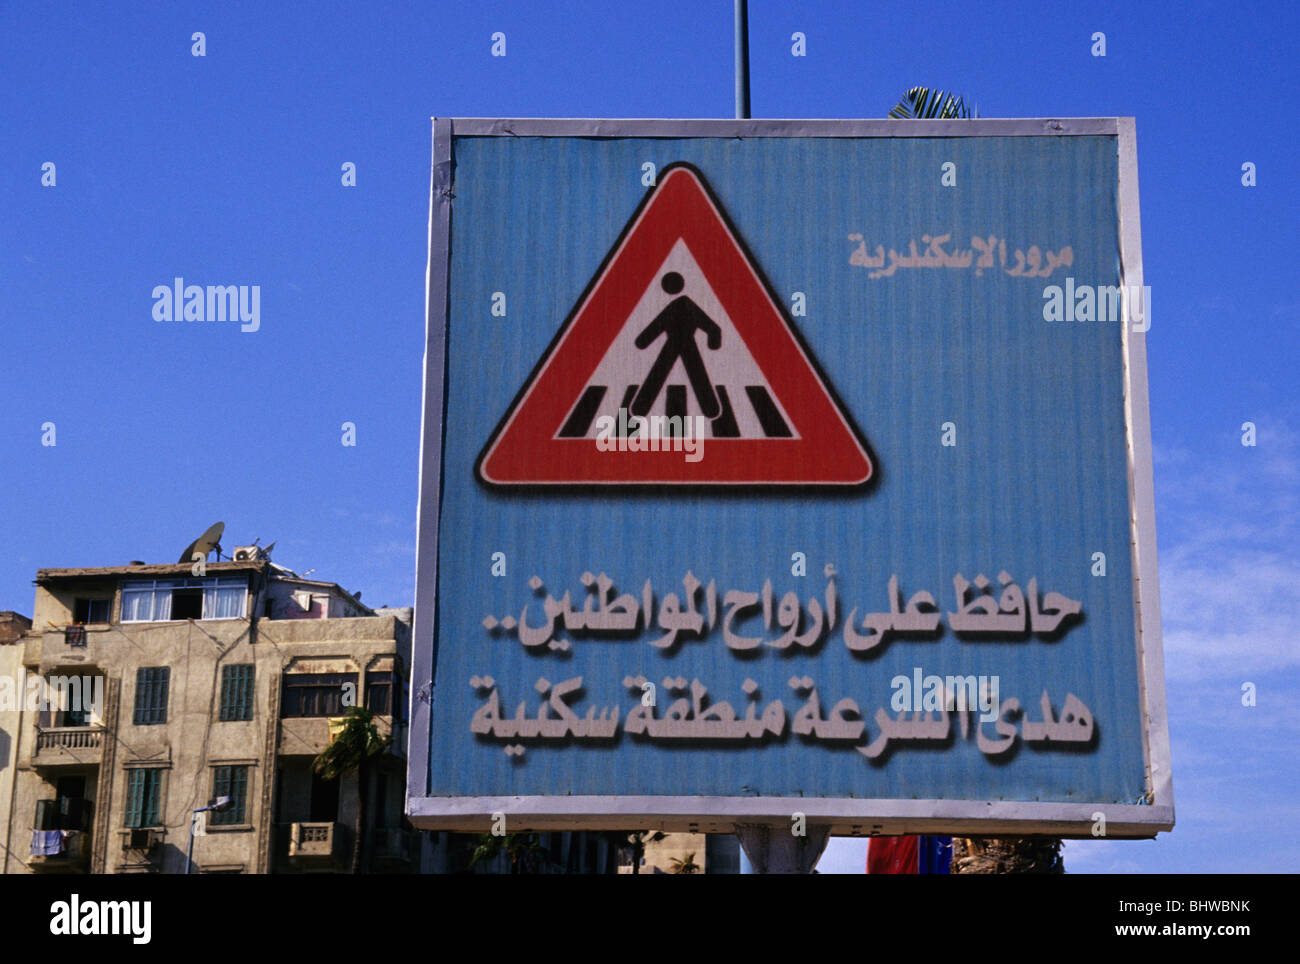 pedestrian crossing sign with arab text - Alexandria - Egypt Stock Photo